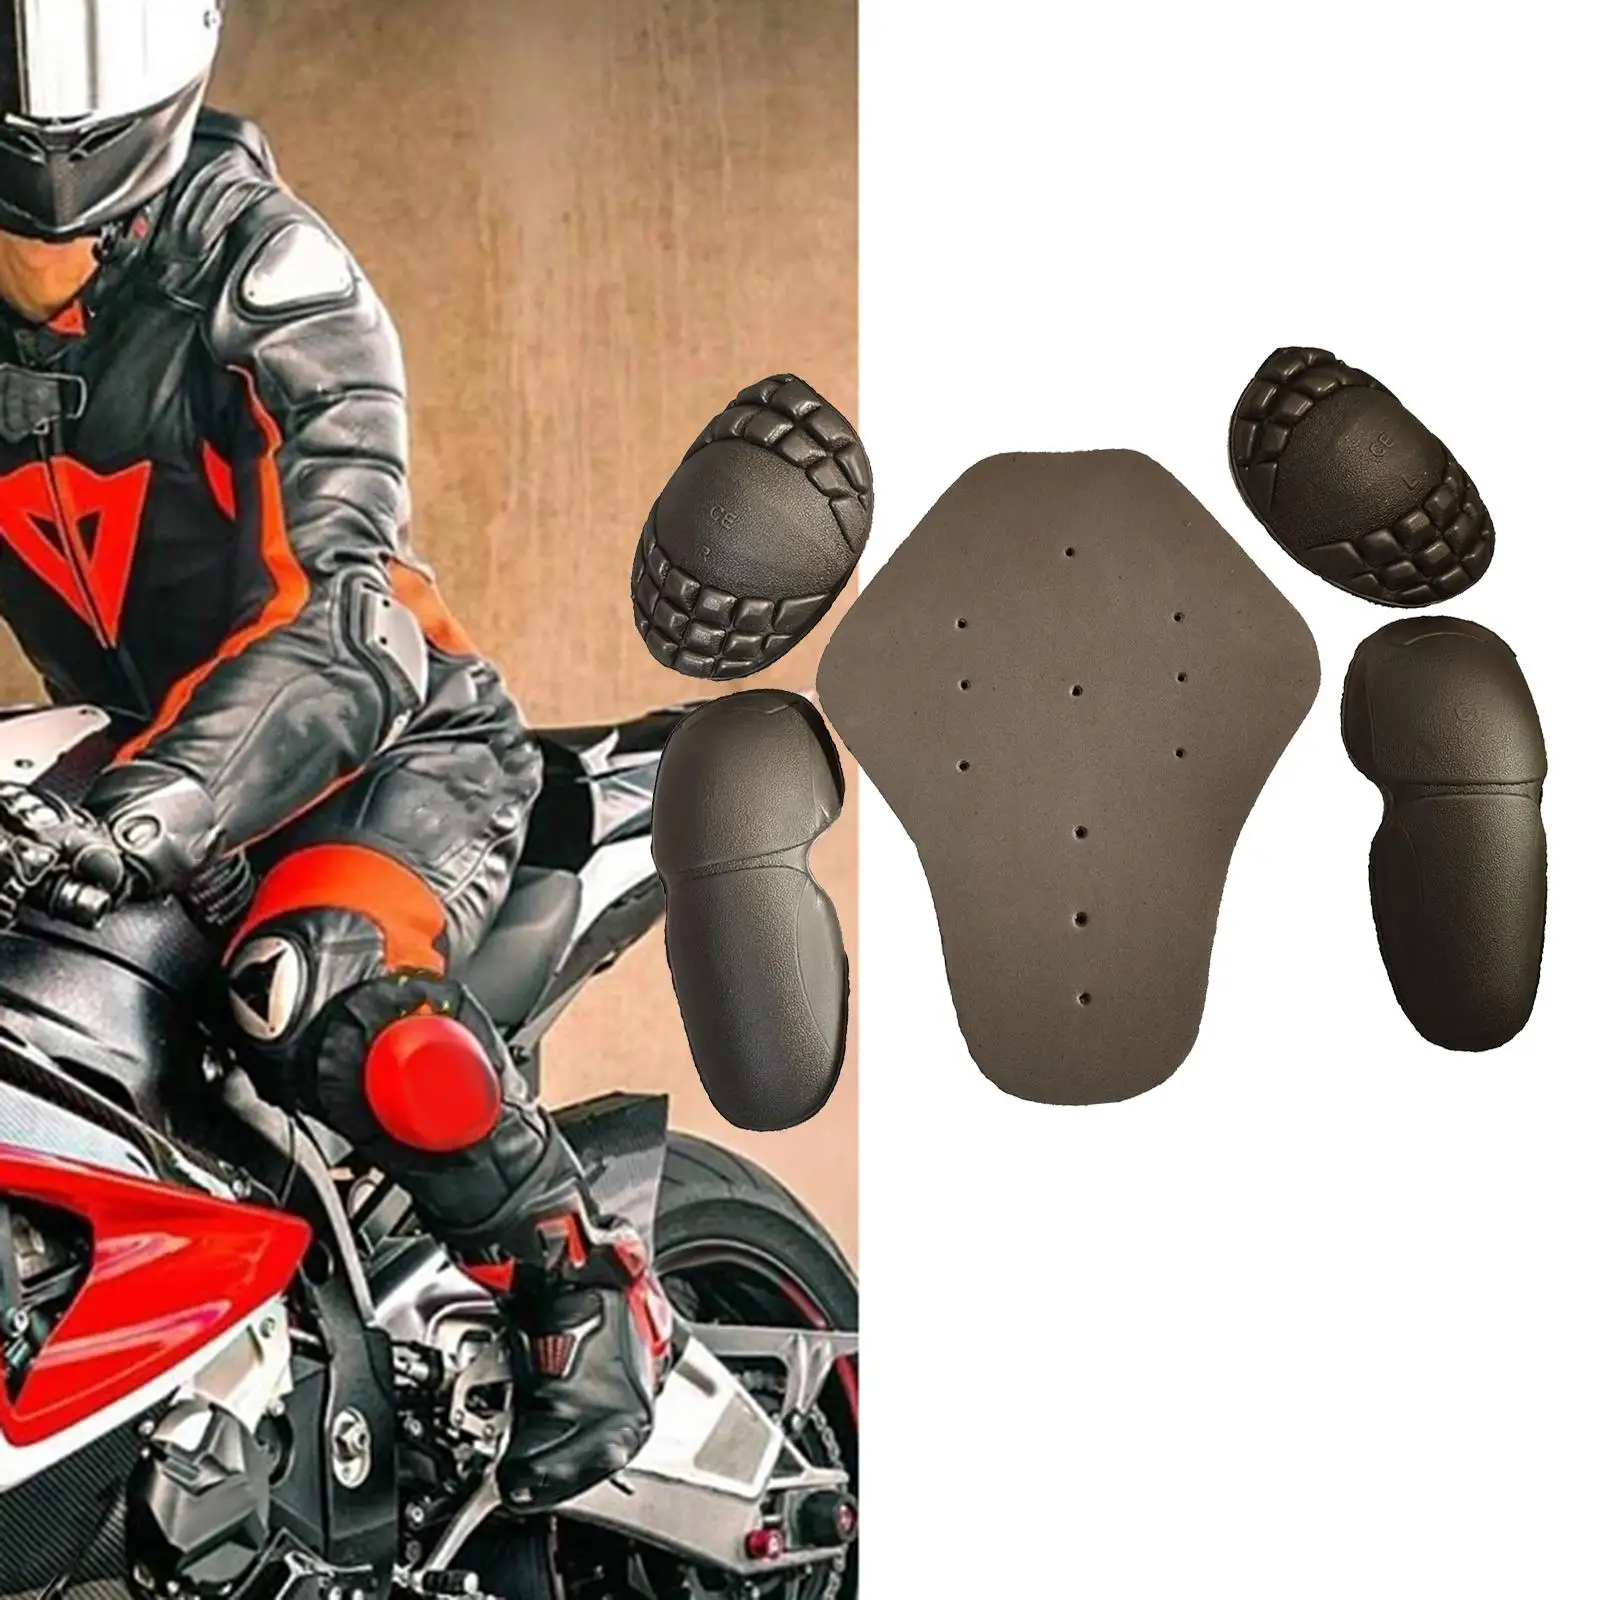 5Pcs Motorbike Body Protective Gear Motorcycle Accessories EVA Motorcycle Riding